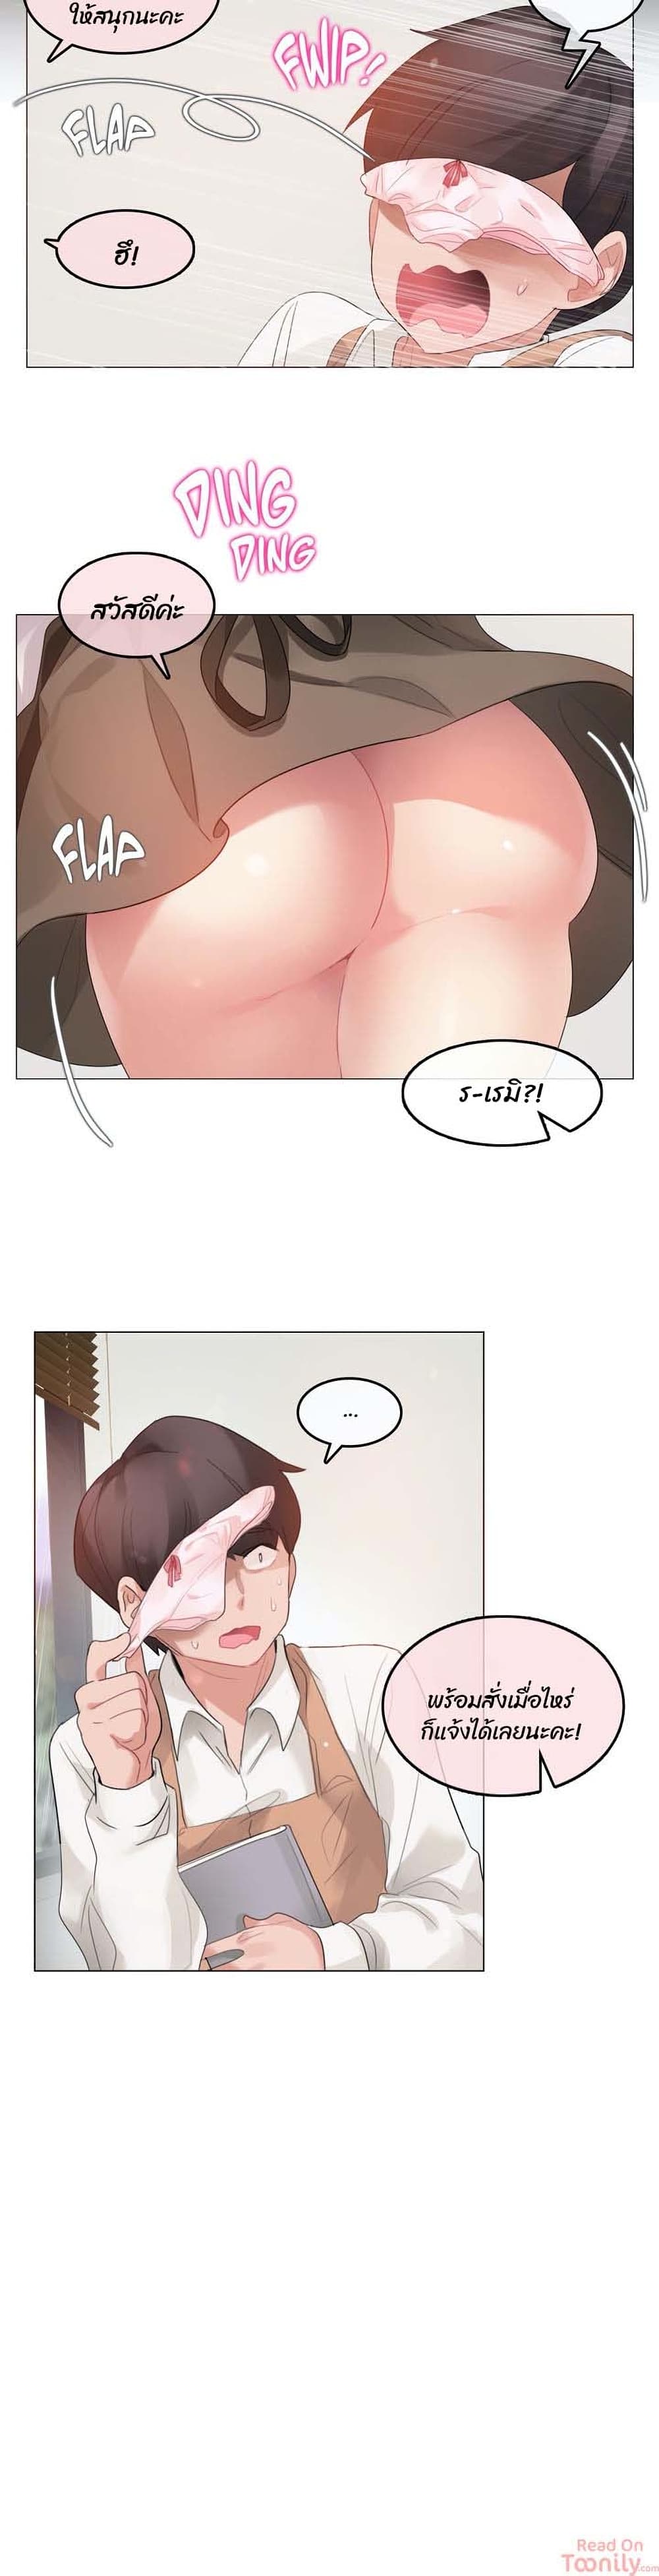 A Pervert's Daily Life 84 (8)